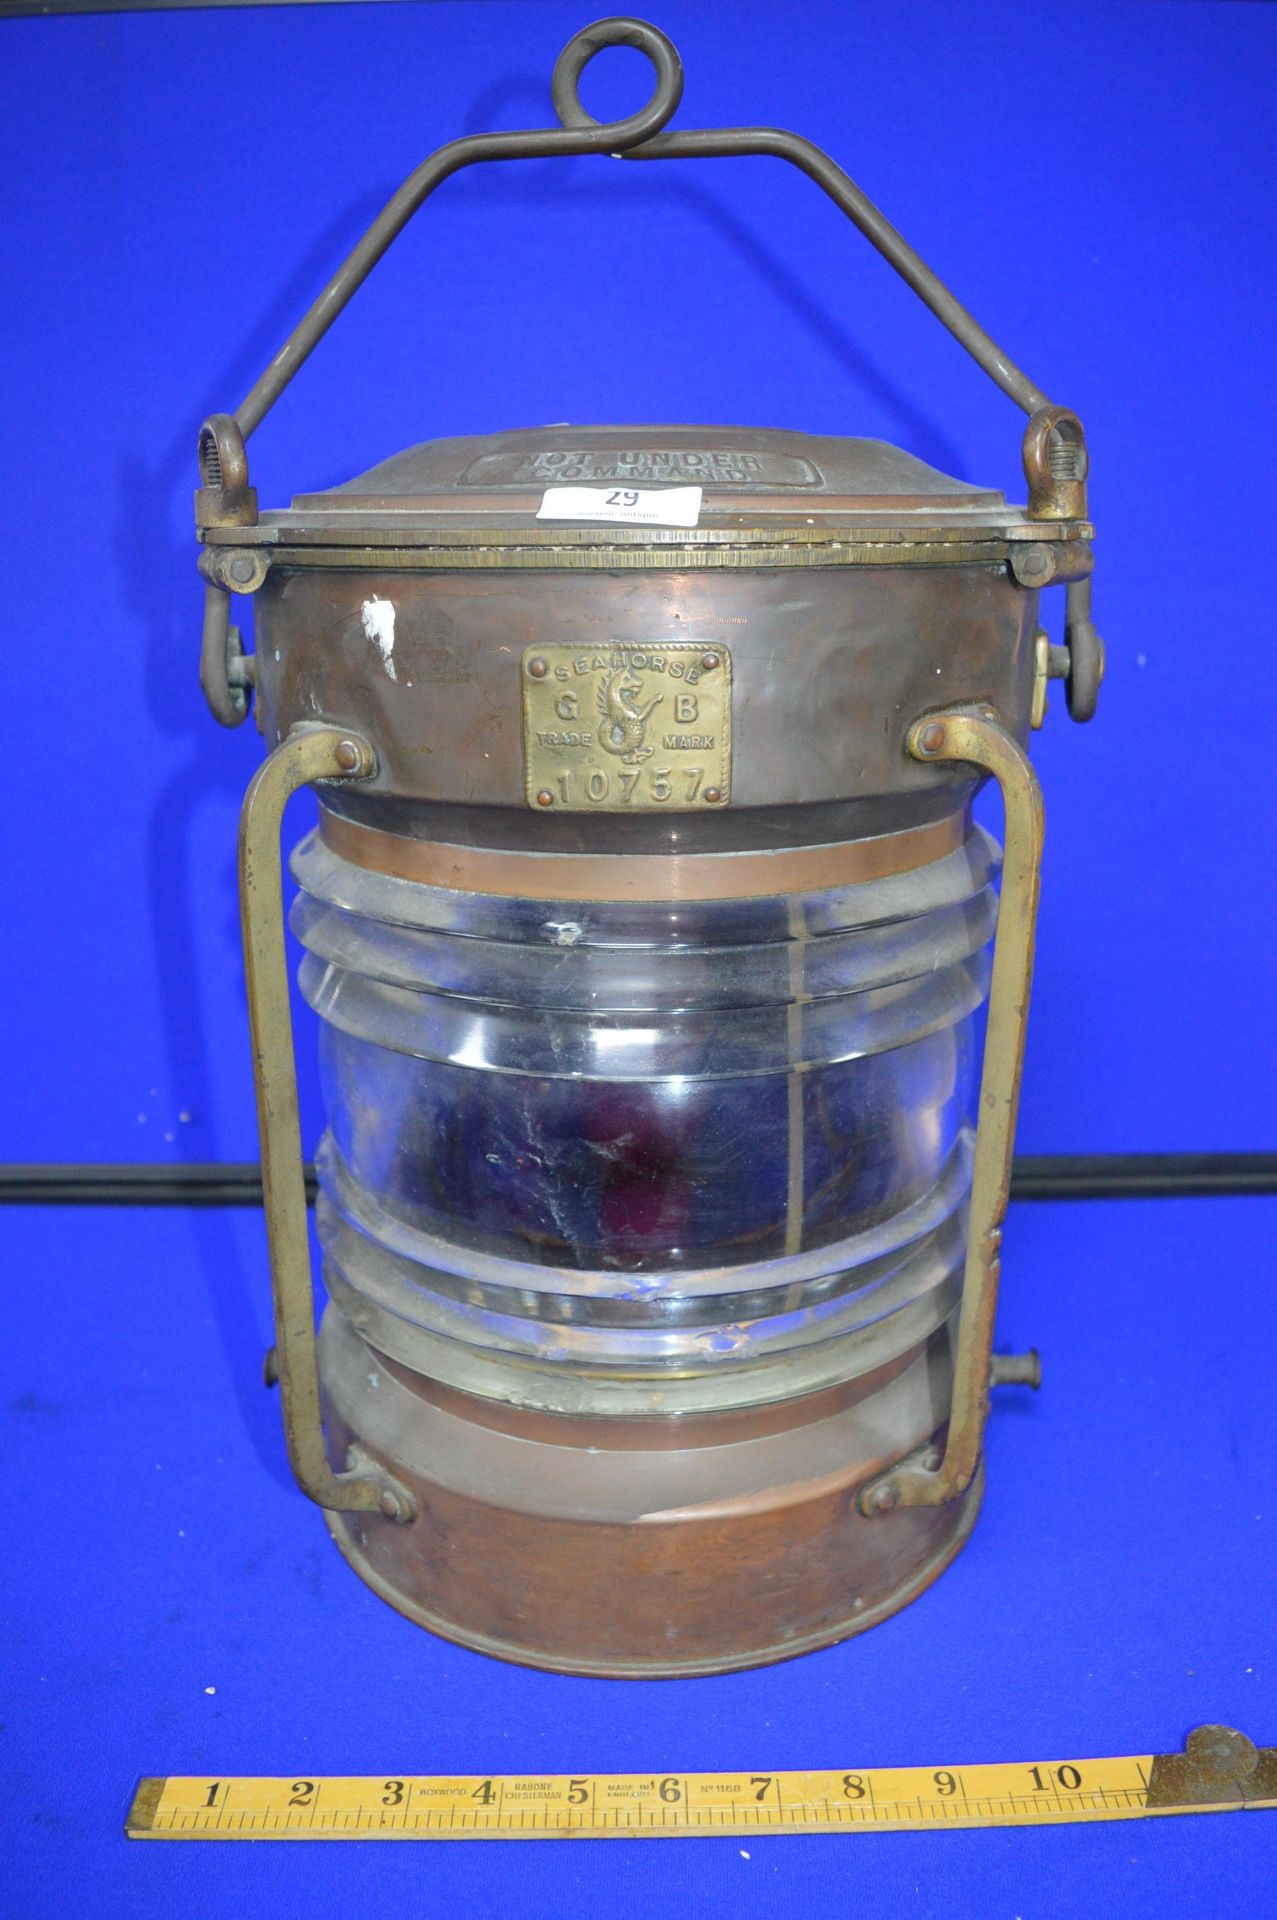 Seahorse Brand Copper Portside Ships Lamp; Not Under Command - Image 2 of 3